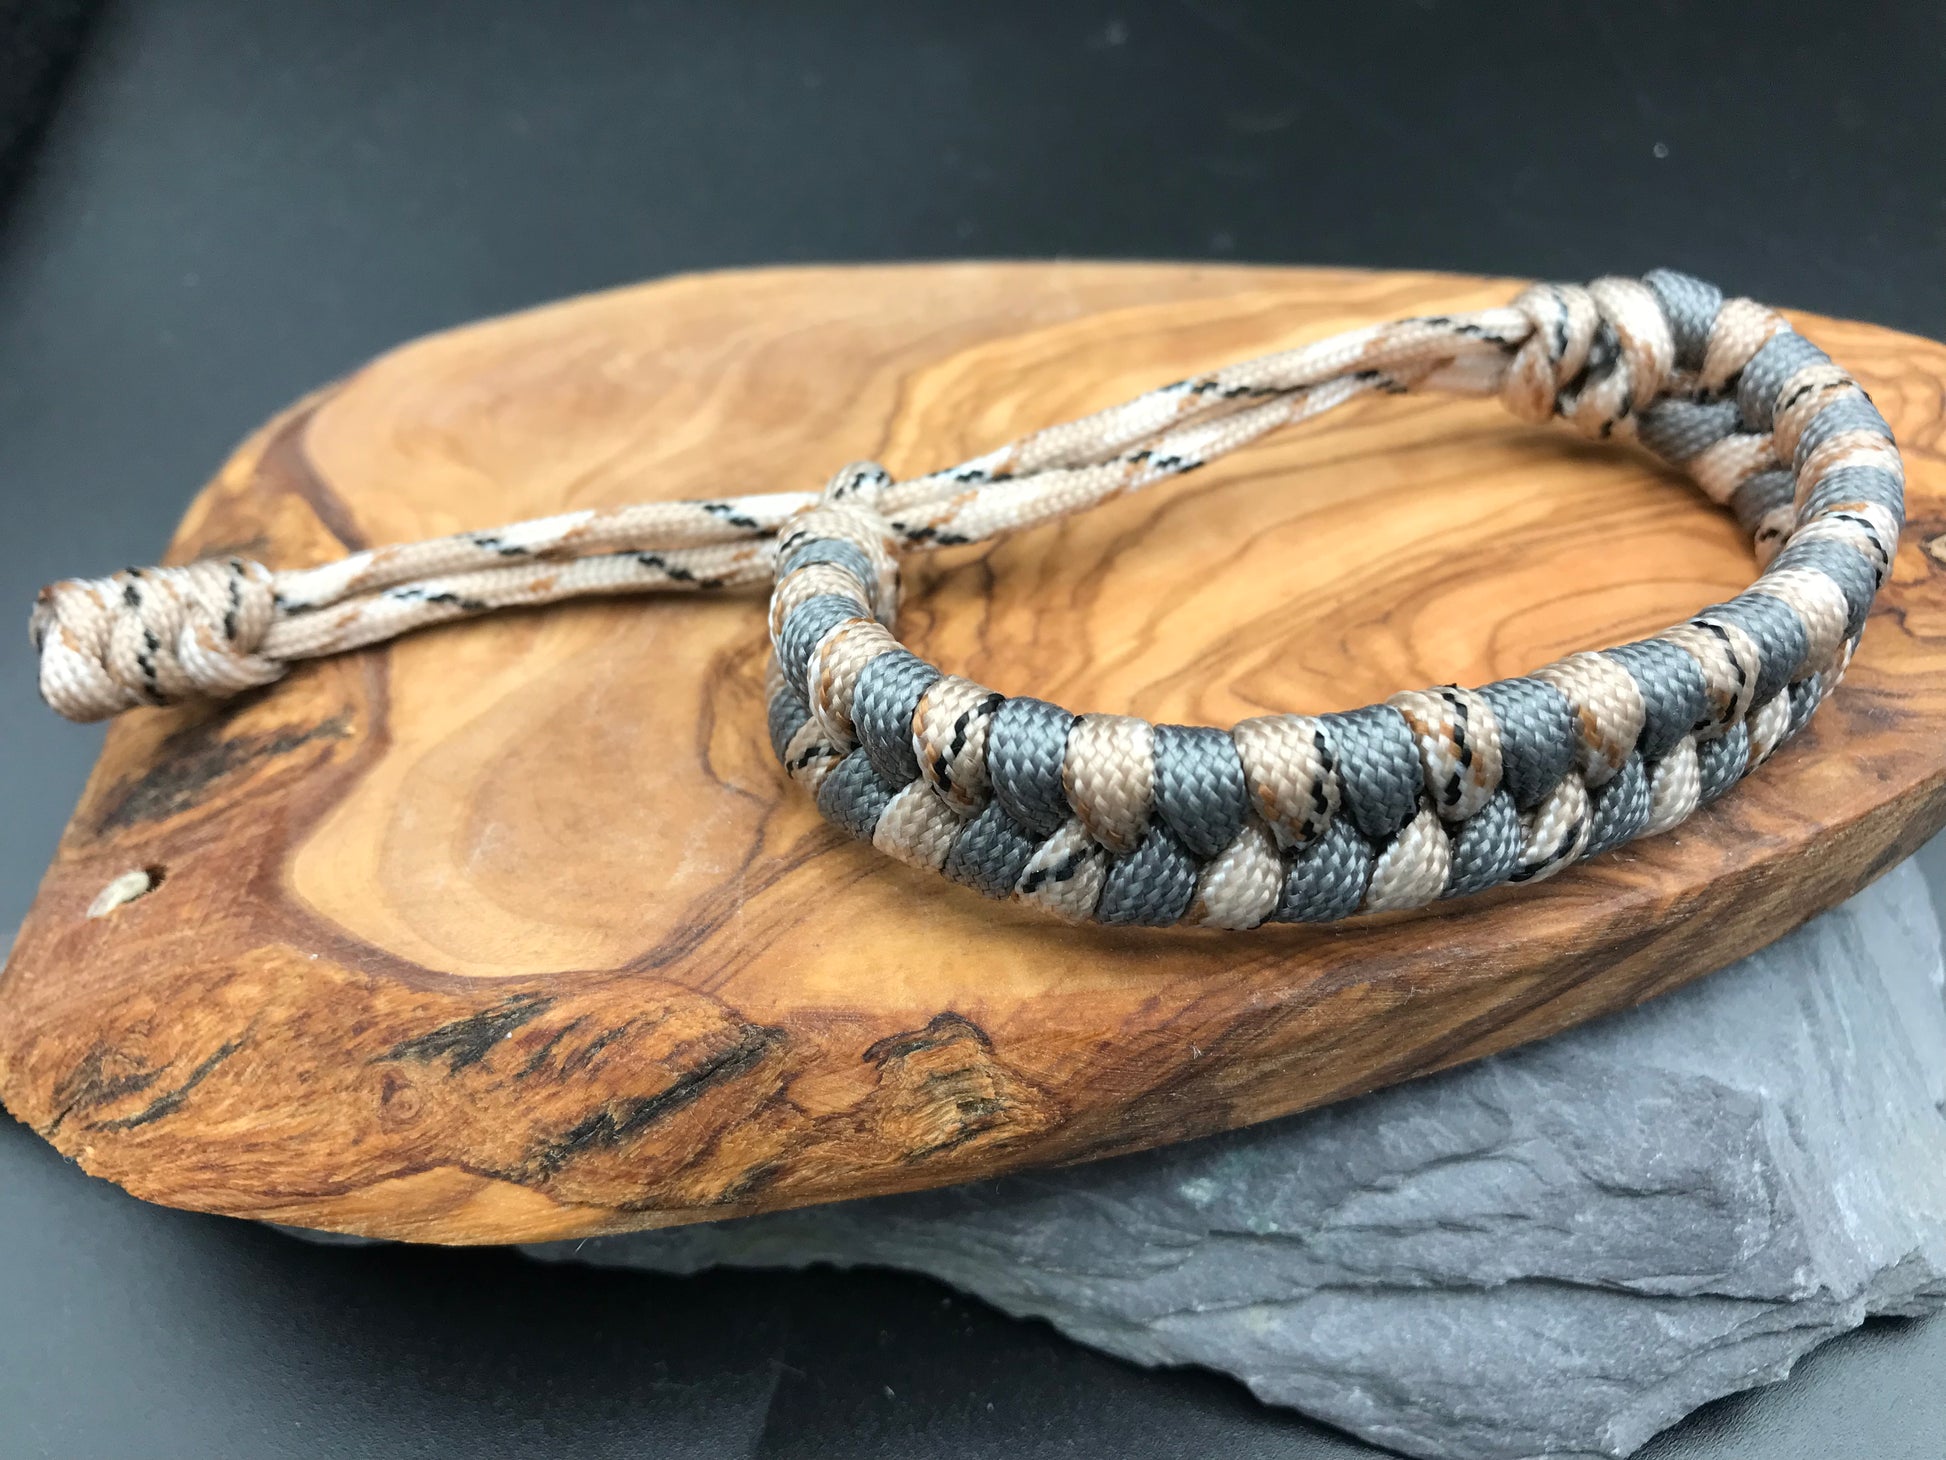 Handmade Paracord Fishtail weave bracelet in Desert camoflague and grey colours